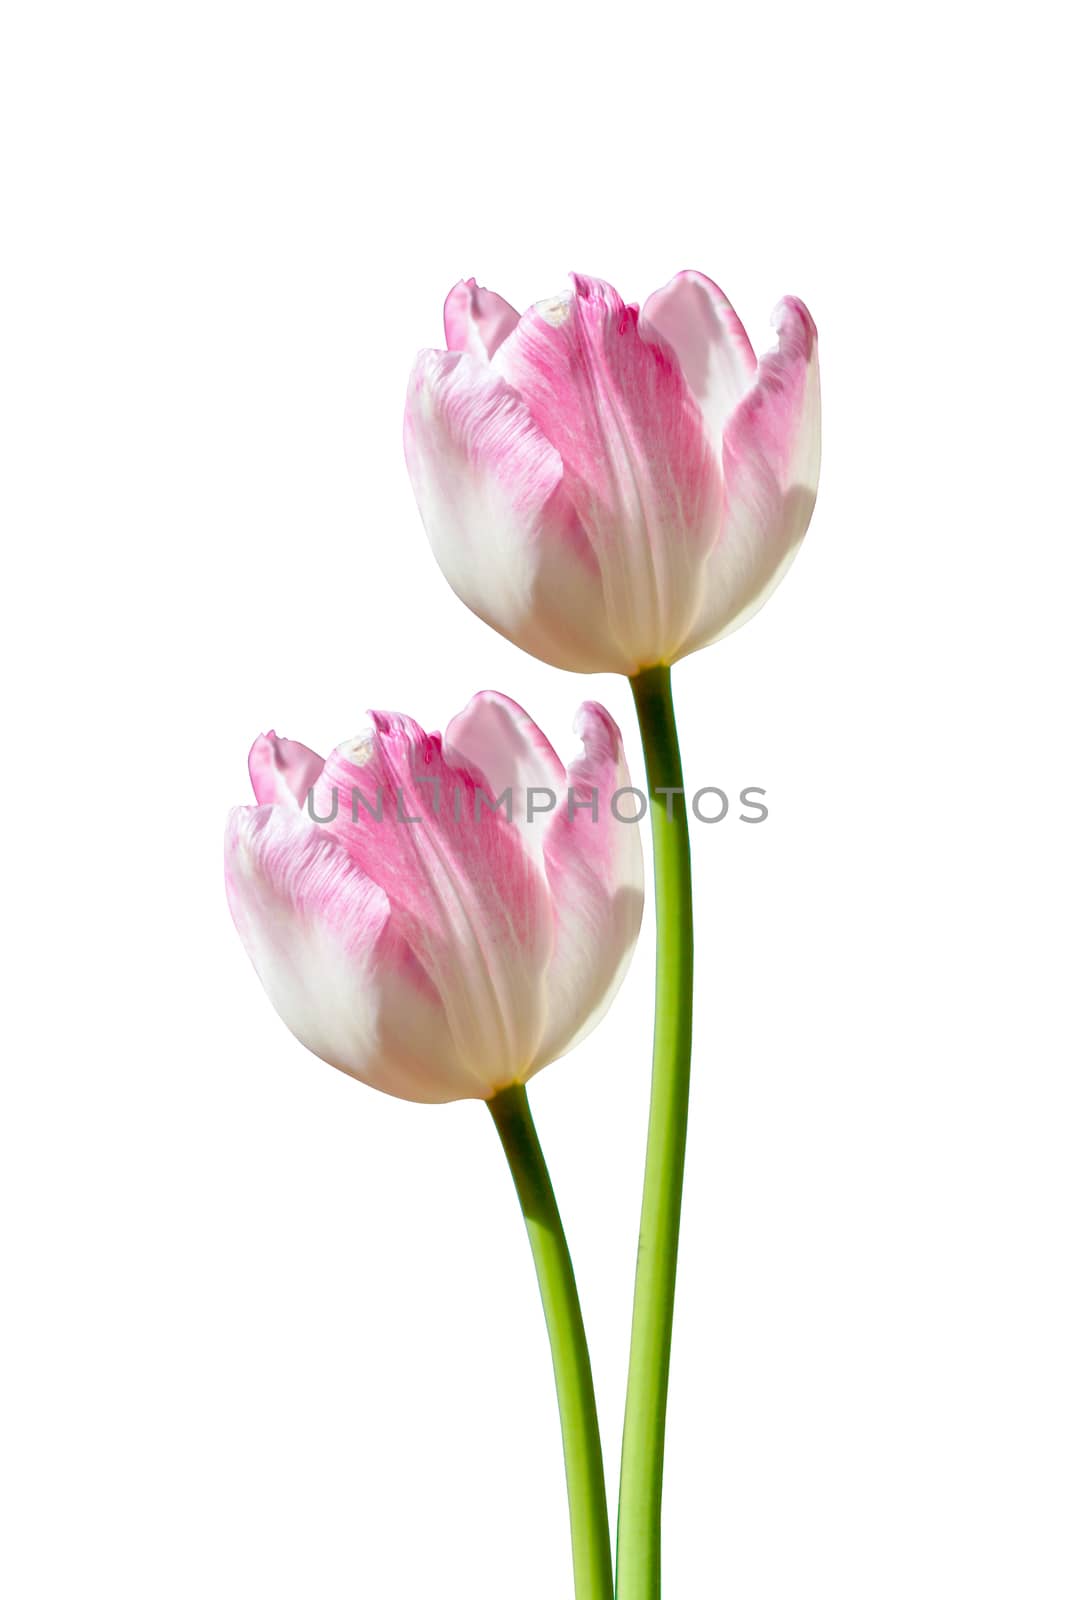 White and pink tulip isolated on white background by Noppharat_th